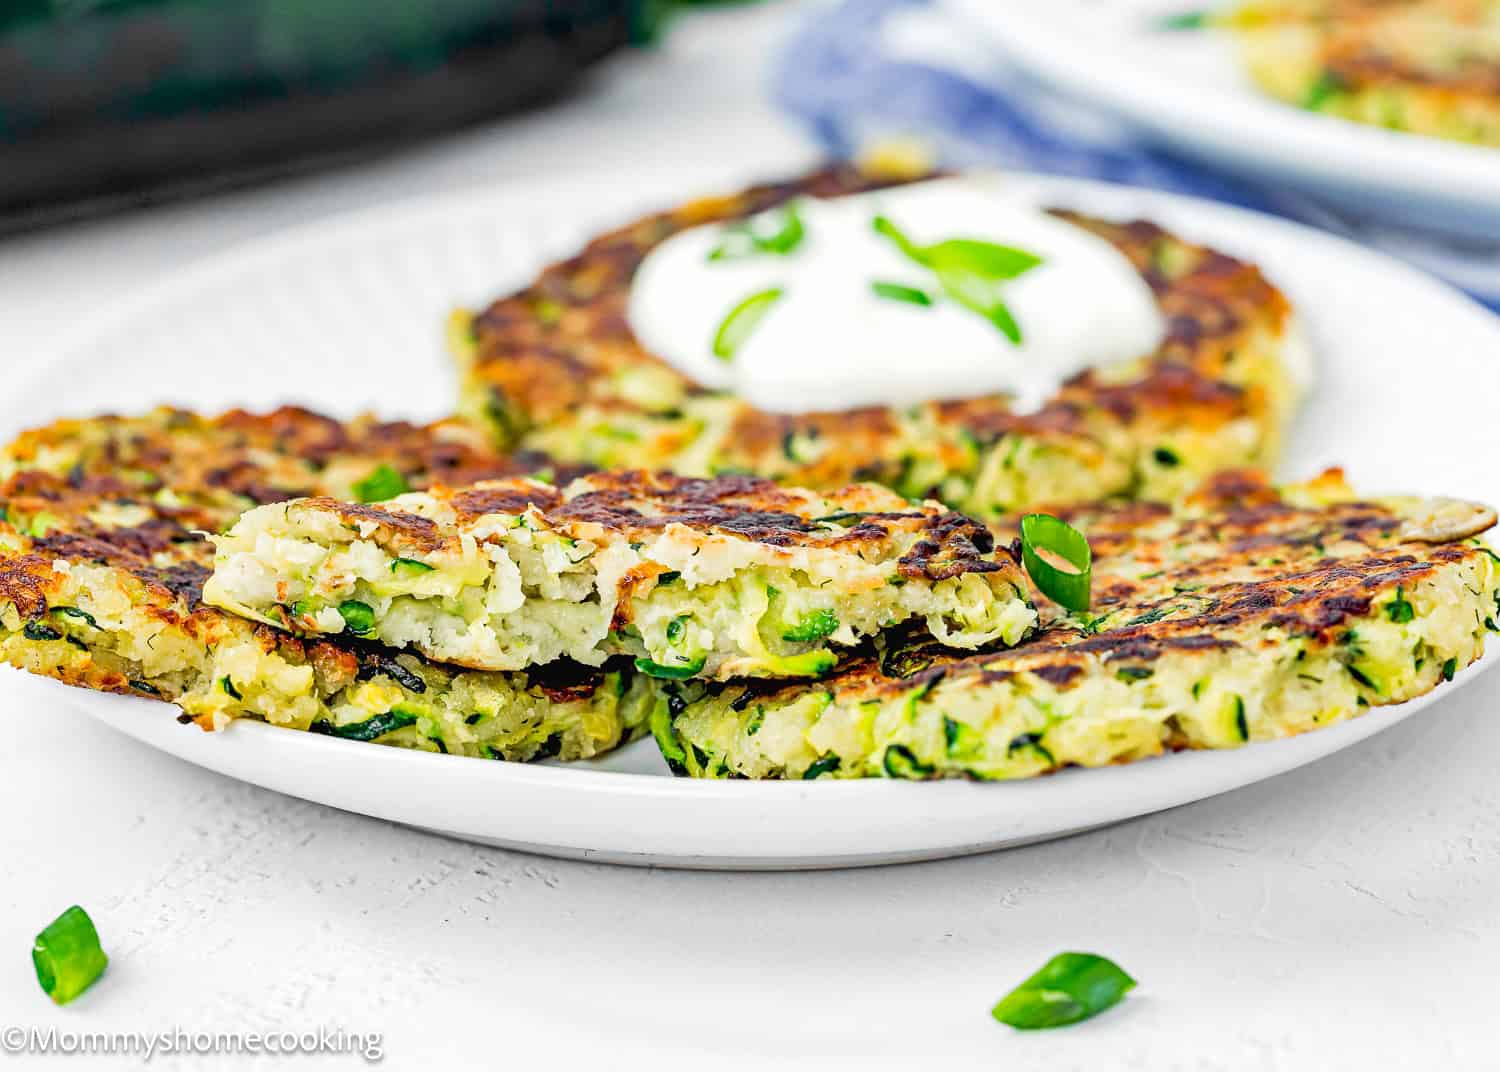 Four Eggless Zucchini Fritters on a plate showing its perfect crispy and tender texture.